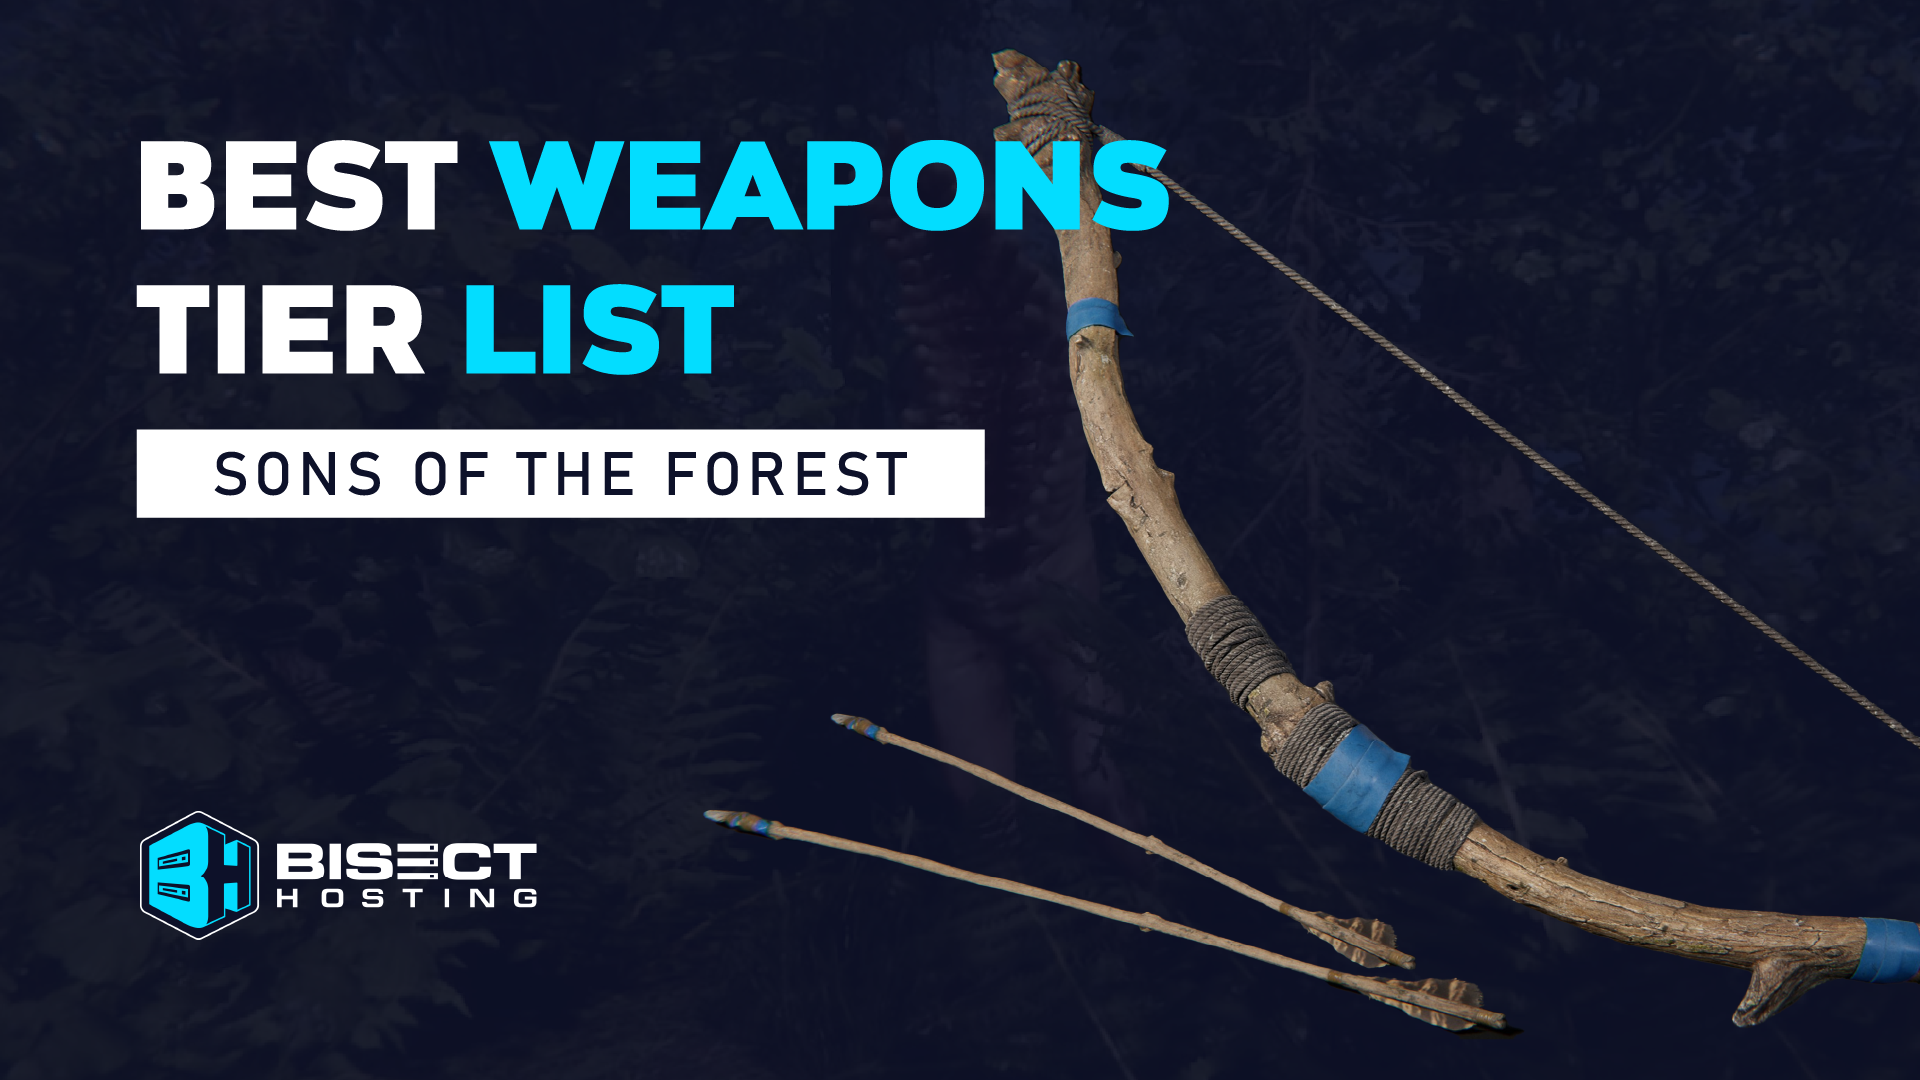 Sons of the Forest Weapons Tier List: Ranking the Best Melee and Ranged Weapons